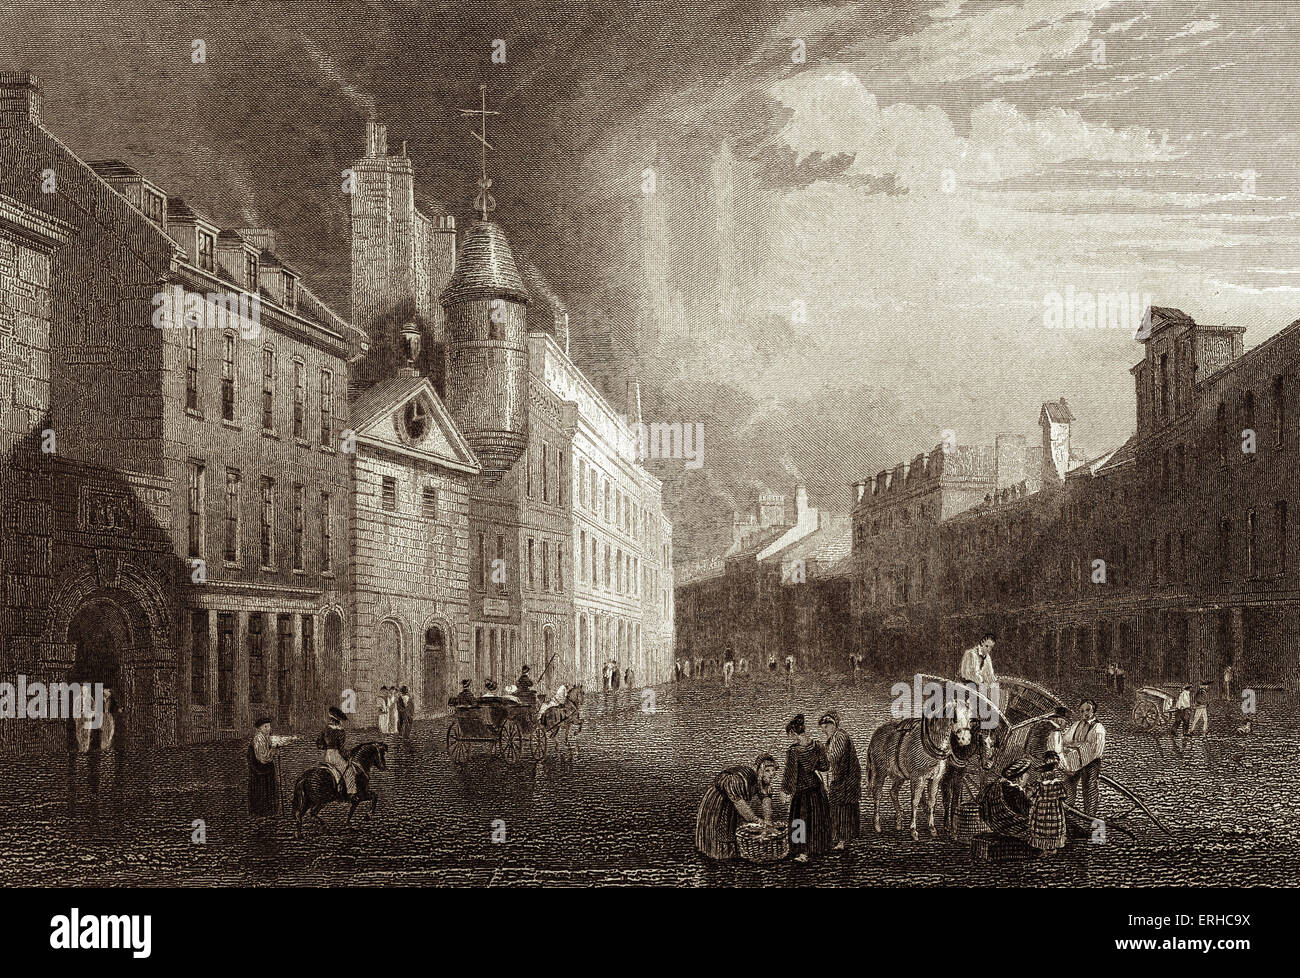 Broad Street, Aberdeen, Scotland. Home to poet, Lord Byron, in the late 18th century. After the engraving by E.Finden, after the drawing by William Purser. George Gordon Byron, 6th Baron Byron. British poet 22 January 1788 – 19 April 1824. Stock Photo